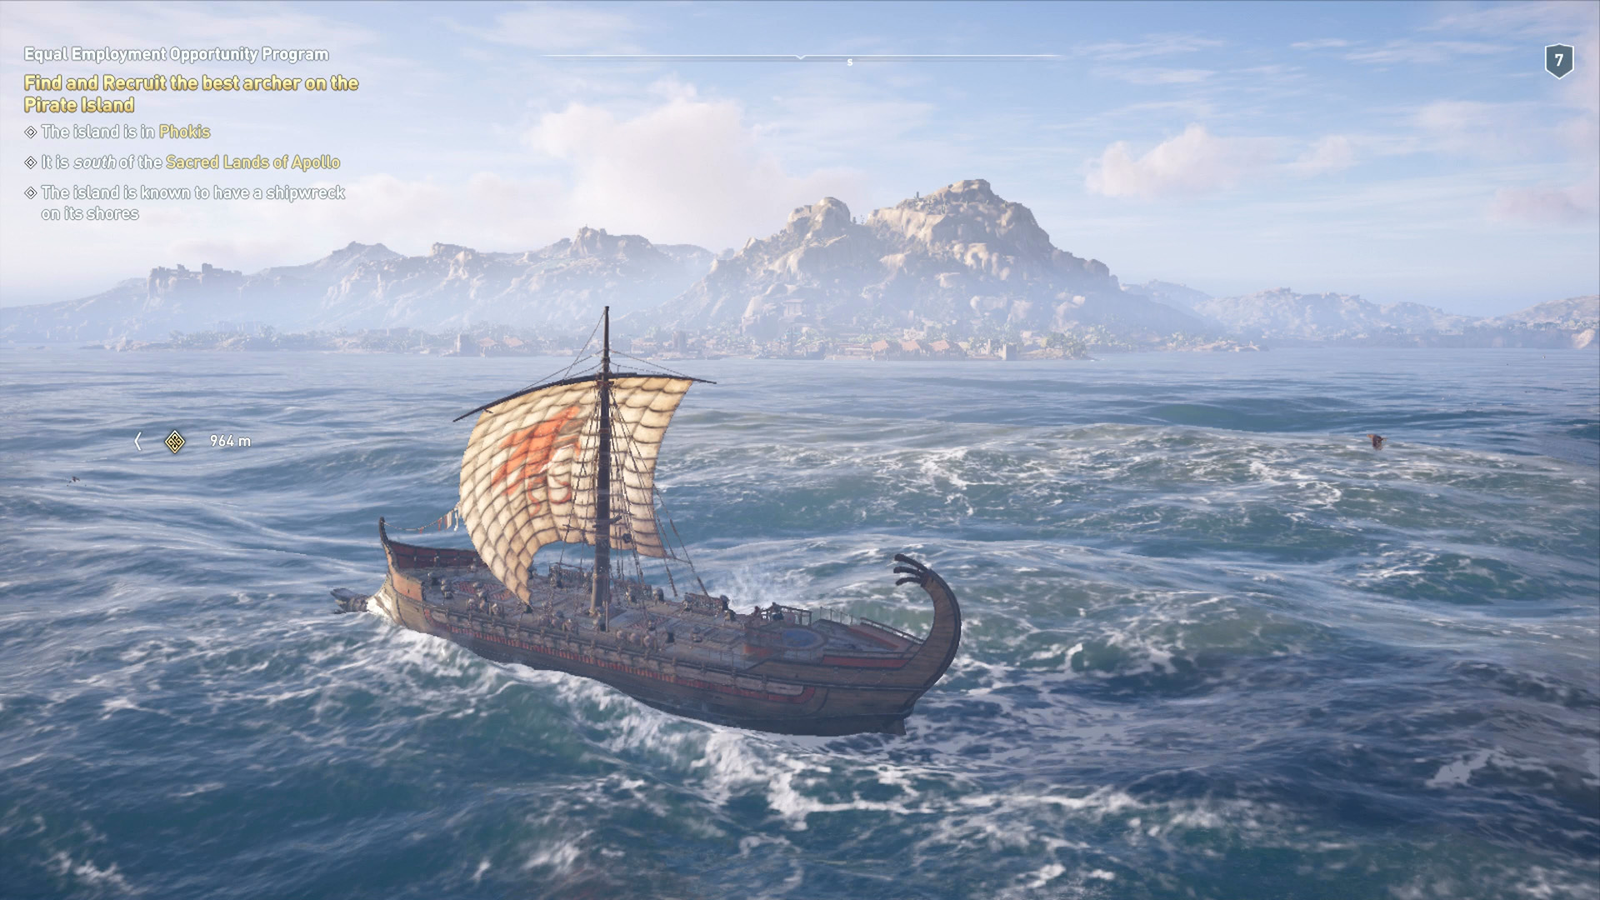 Loot And Recruit: A Guide To Mercenaries in 'Assassin's Creed Odyssey